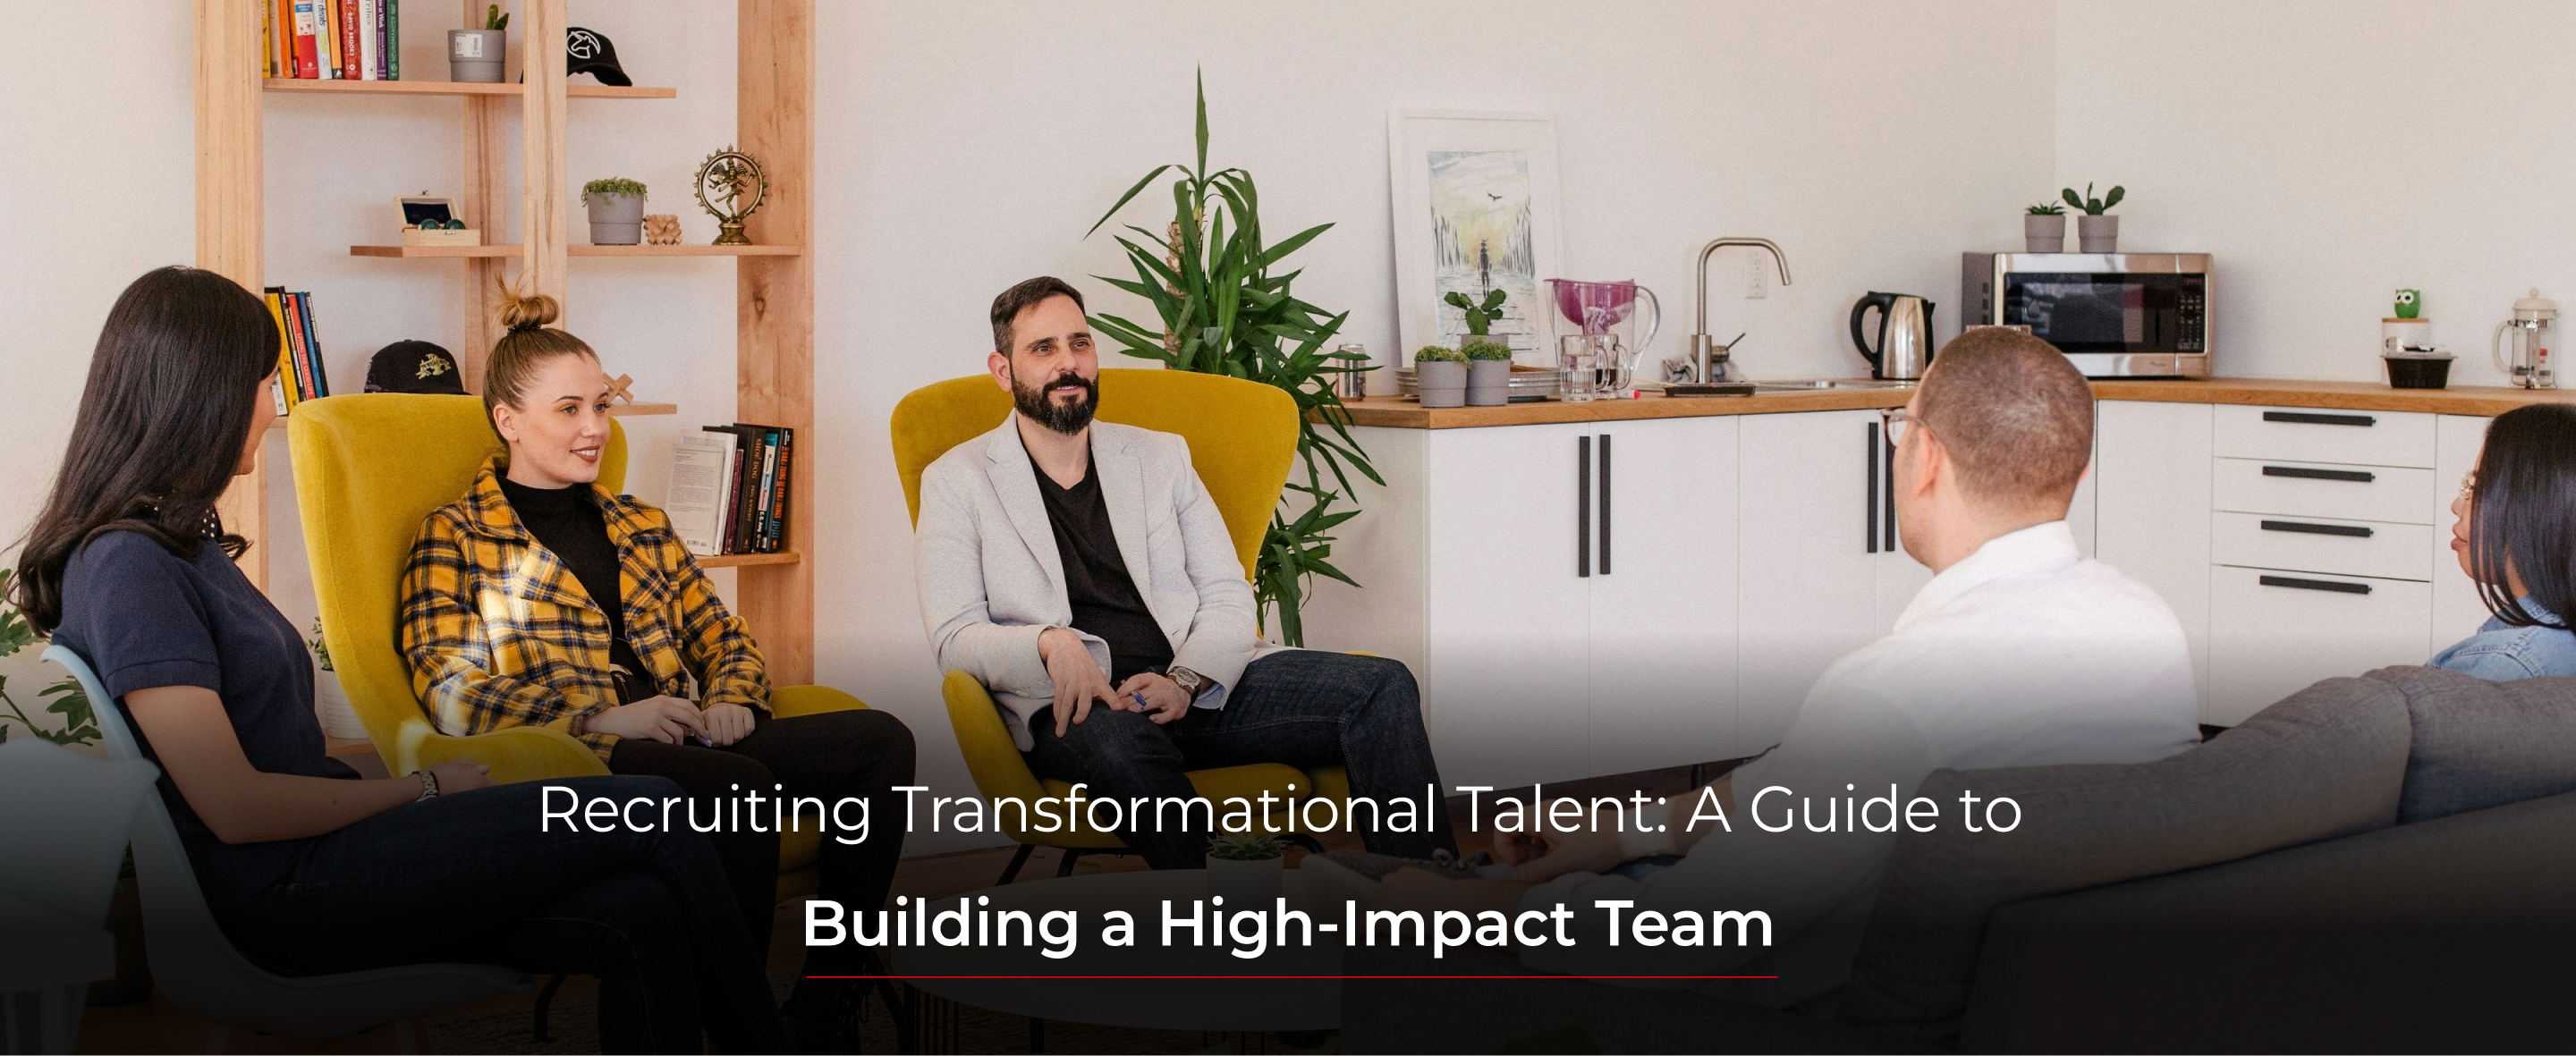 Recruiting Transformational Talent: A Guide to Building a High-Impact Team